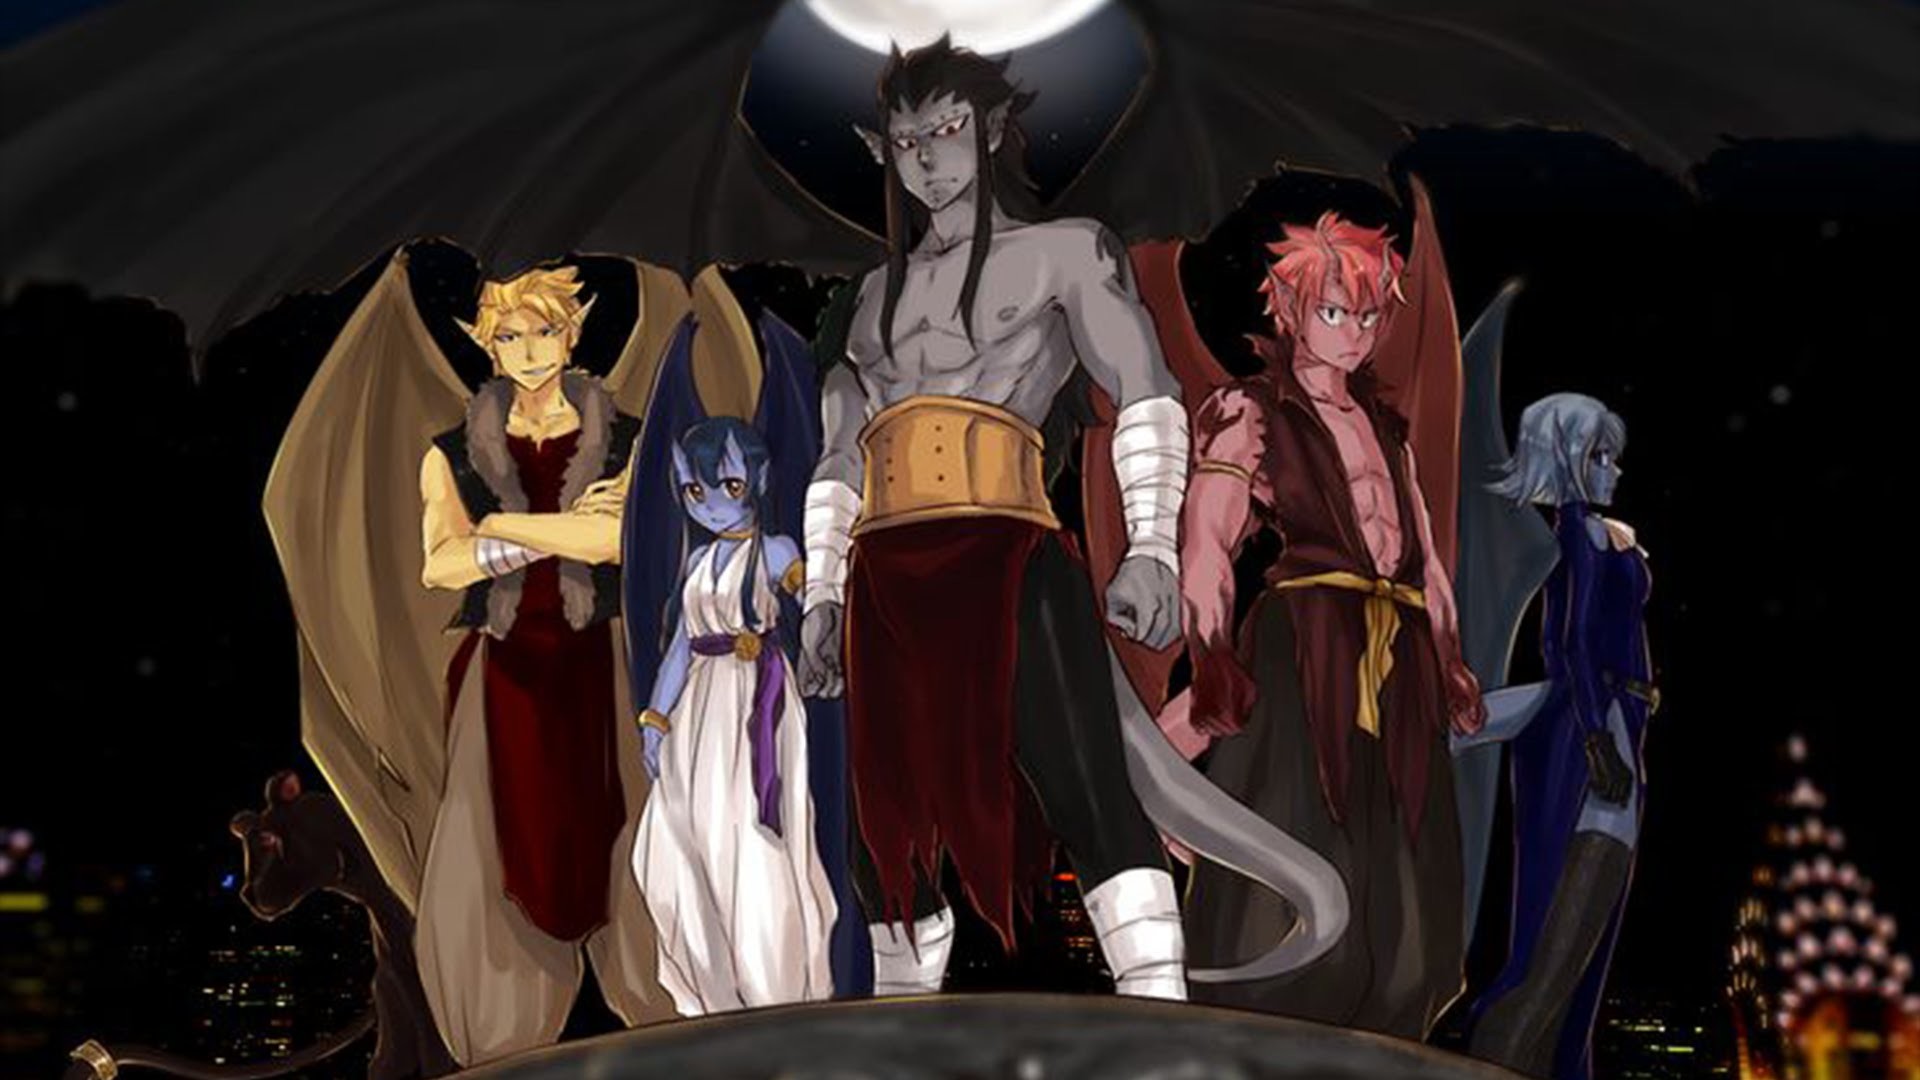 1920x1080 Fairy Tail 7 Dragon Slayer Wallpapers Images